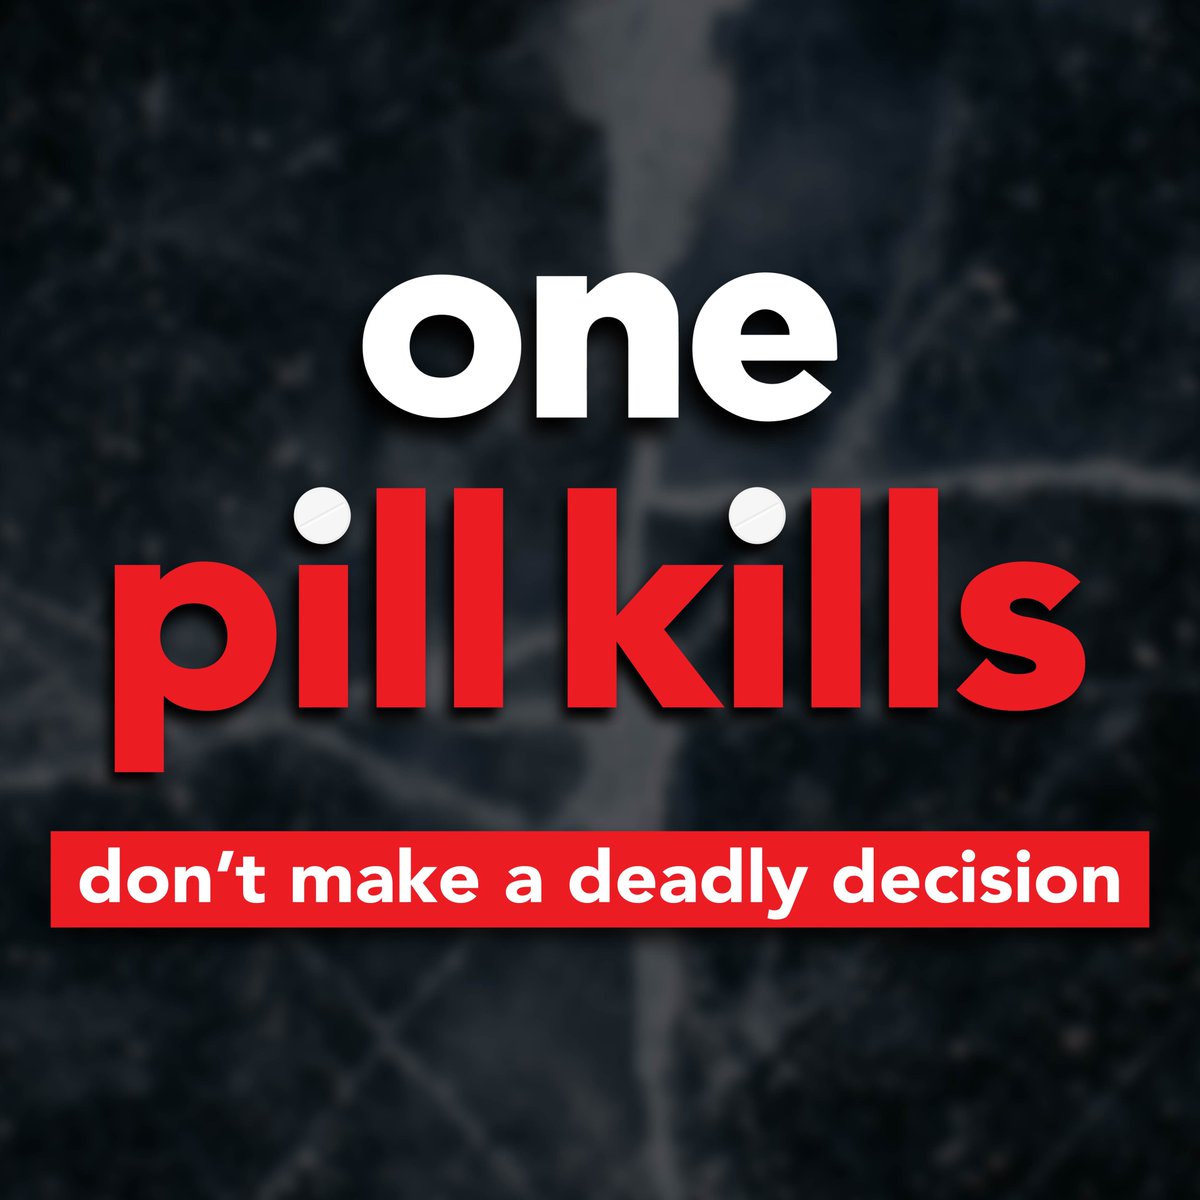 The fentanyl crisis is impacting Texans of all ages ― and that’s why Gov. @GregAbbott_TX tasked DPS and other state agencies with spreading the word about the dangers of fentanyl. Learn more at dps.texas.gov/onepillkills.